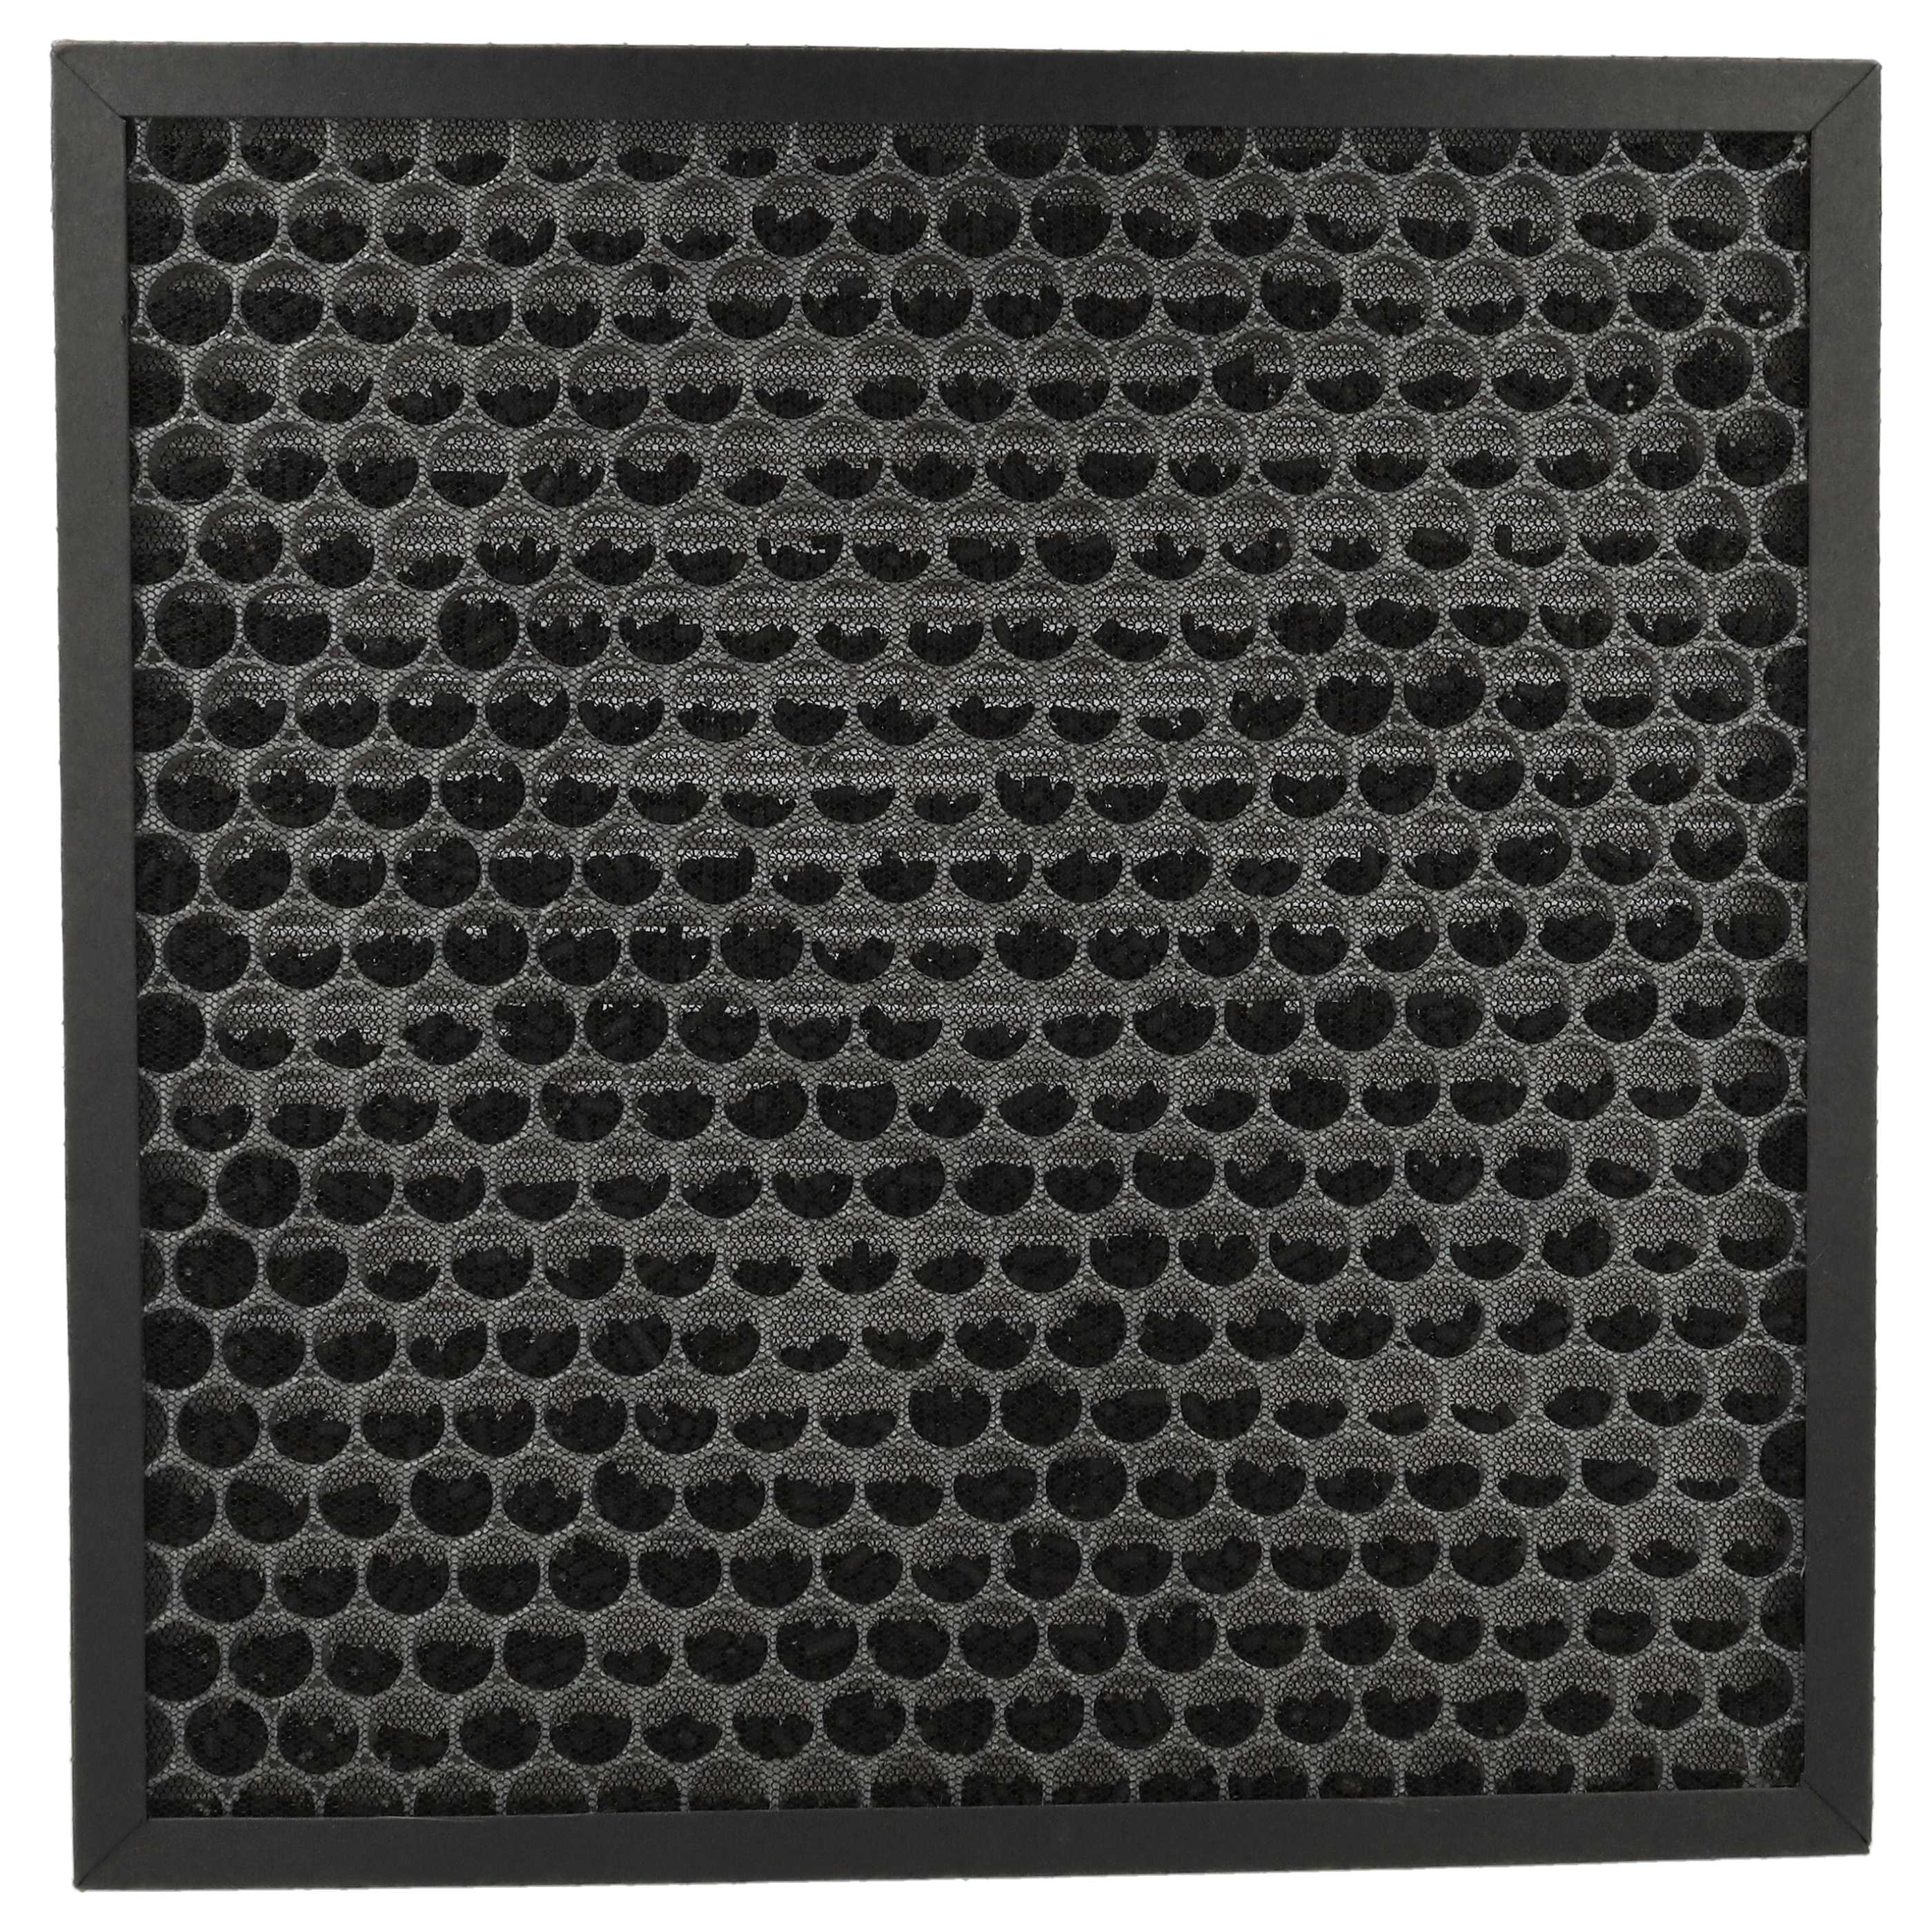 Filter as Replacement for DeLonghi 5513710011 - HEPA + Activated Carbon, 26 x 26 x 3 cm